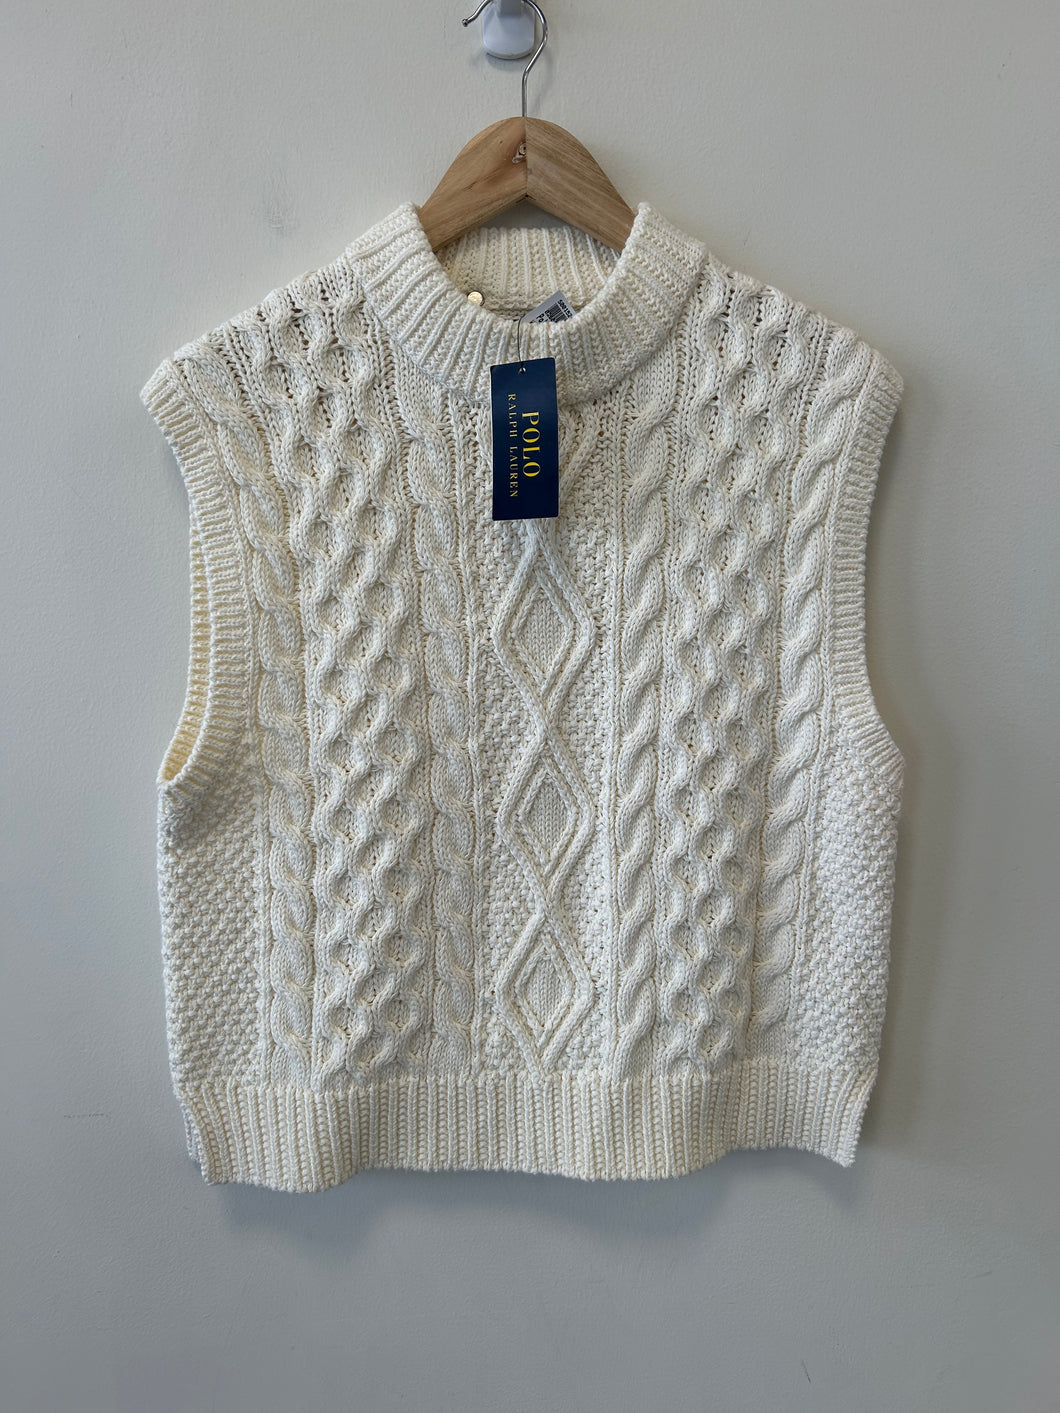 Polo (Ralph Lauren) Sweater Size Extra Large